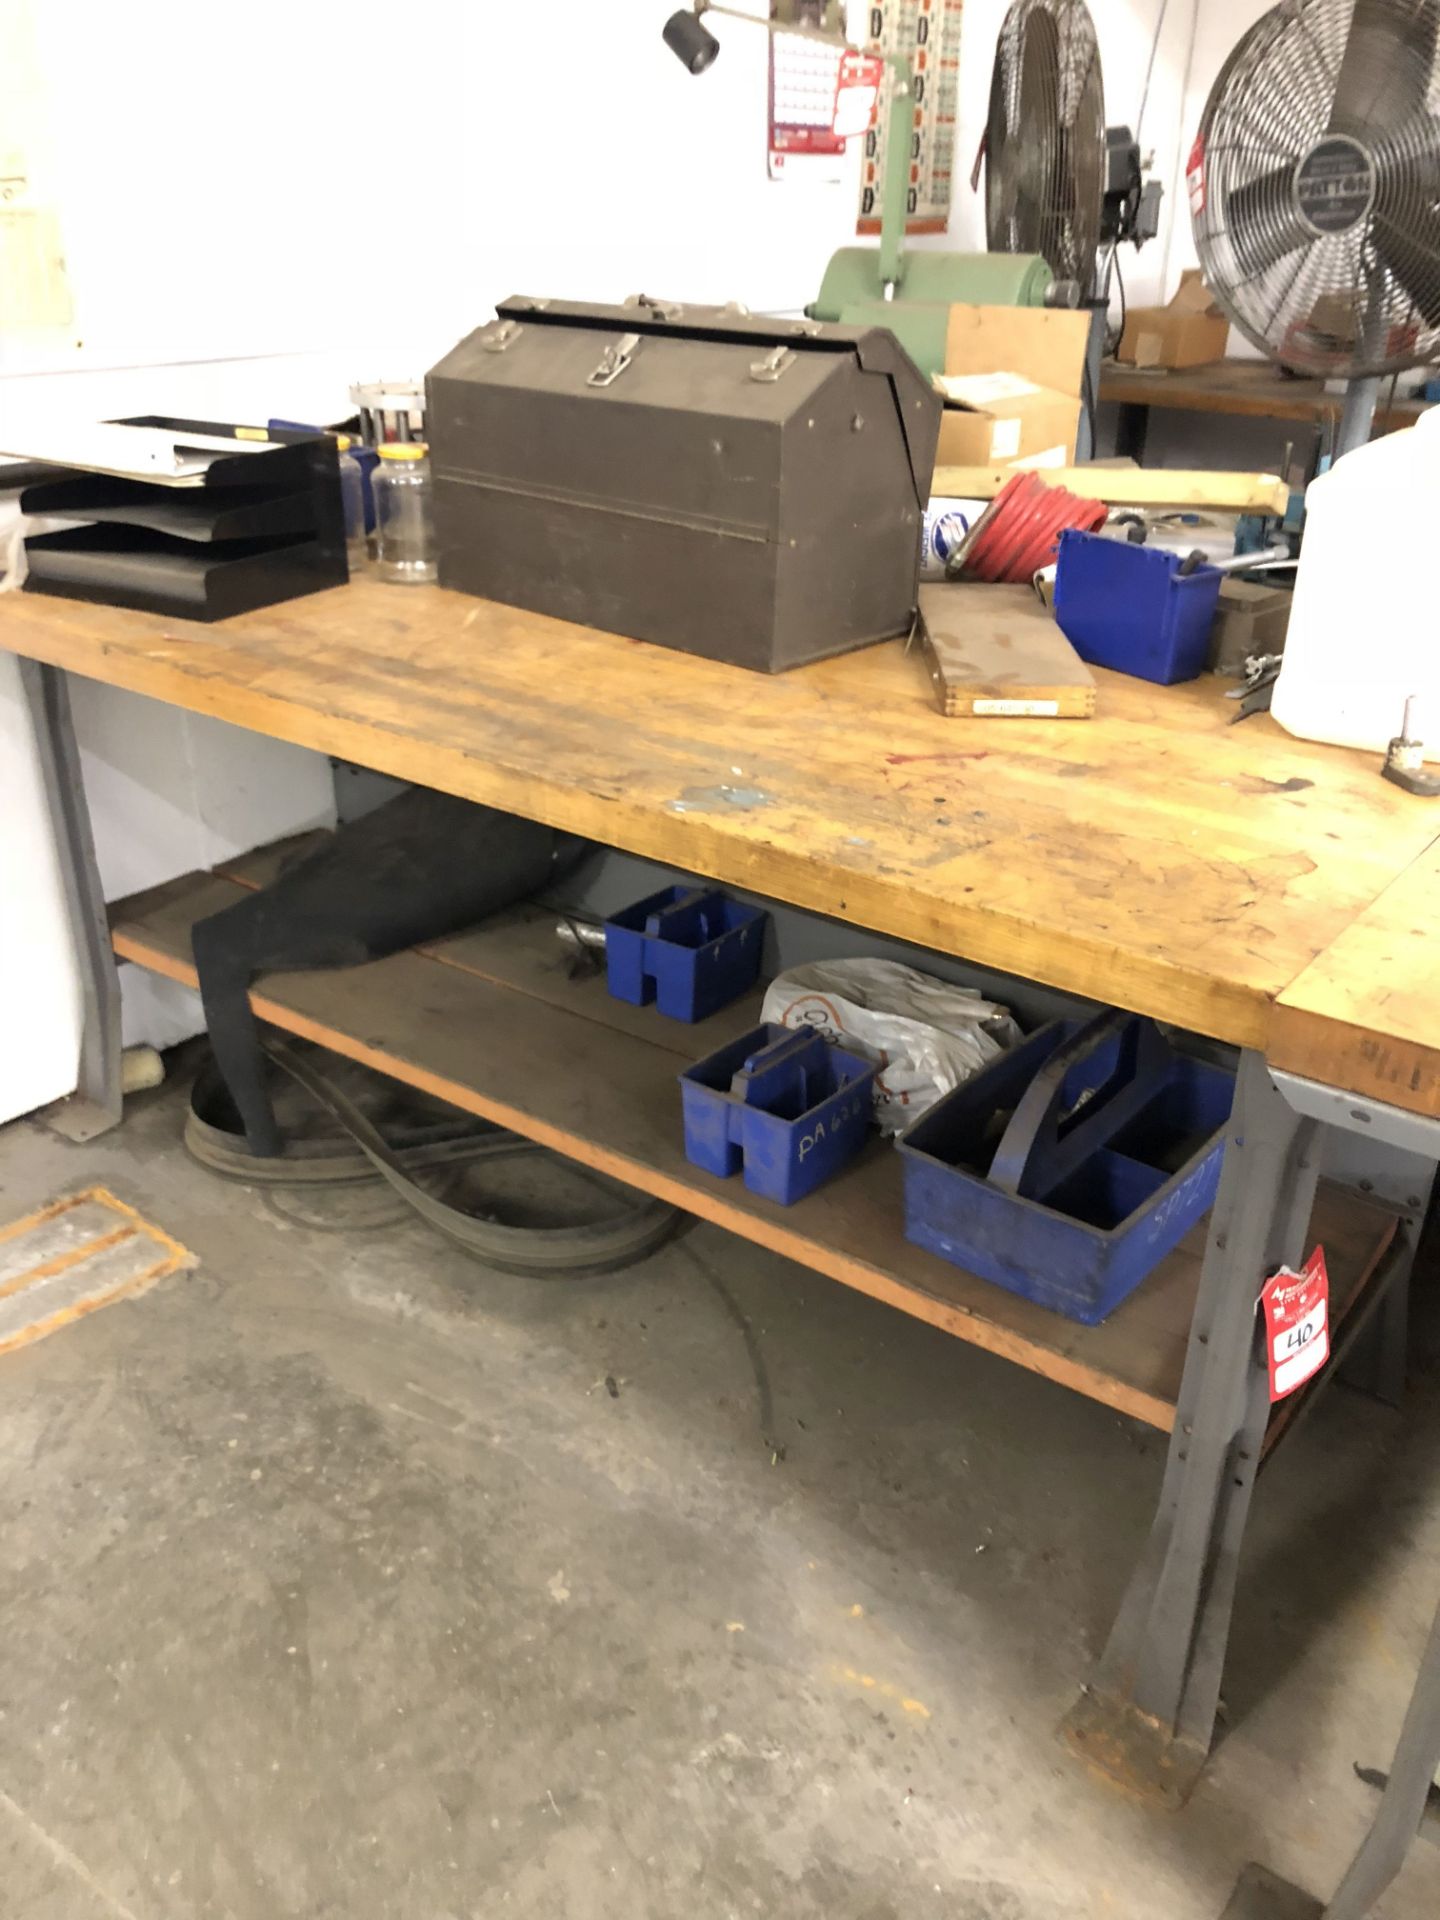 METAL WORK BENCH WITH WOOD TOP, 6' LONG x 3' WIDE x 34'' TALL [CONTENTS ON BENCH NOT INCLUDED] [